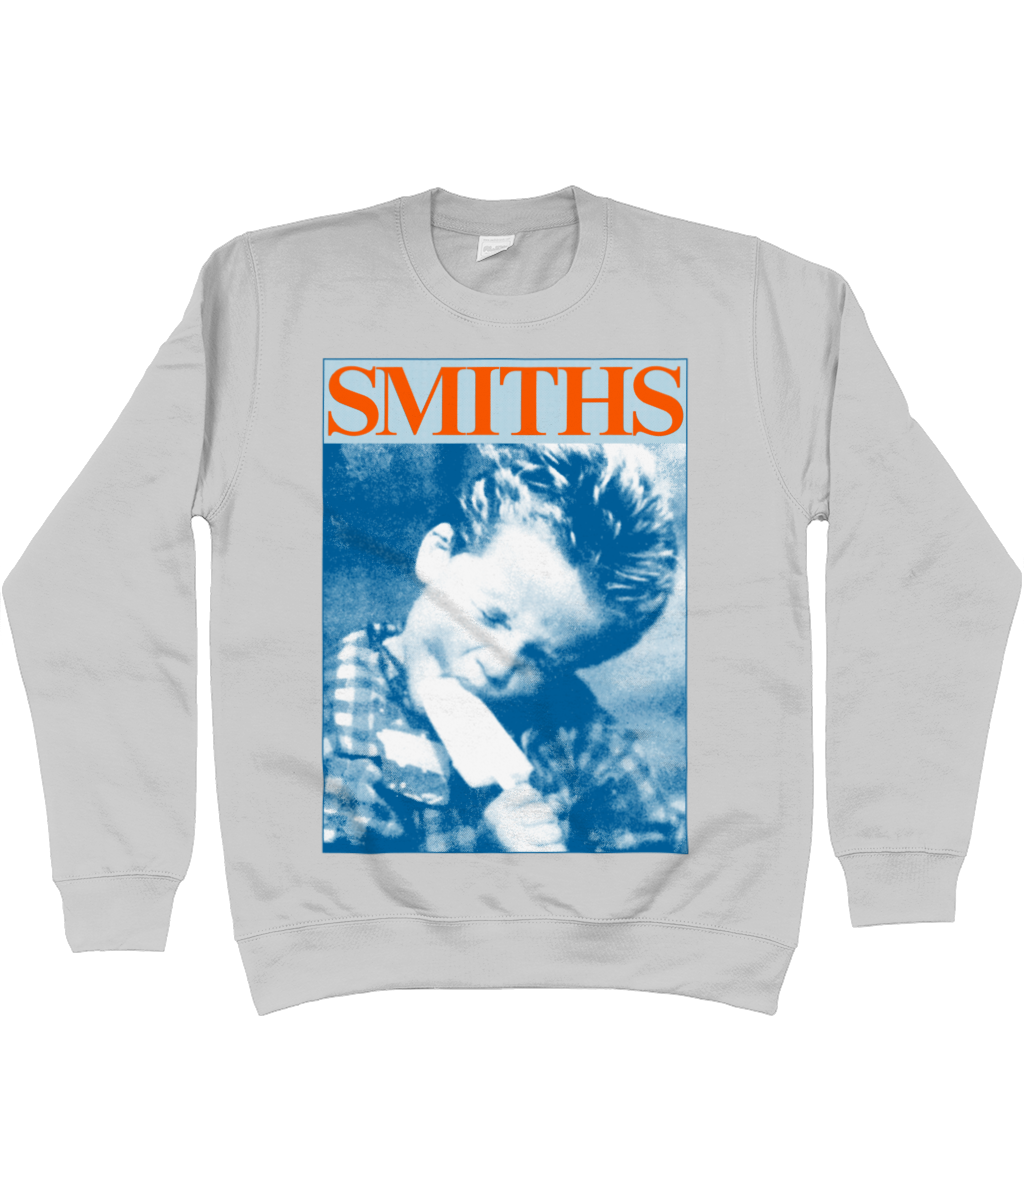 THE SMITHS - 'Boy With Lolly' - 1986 - Blue & Red - Sweatshirt